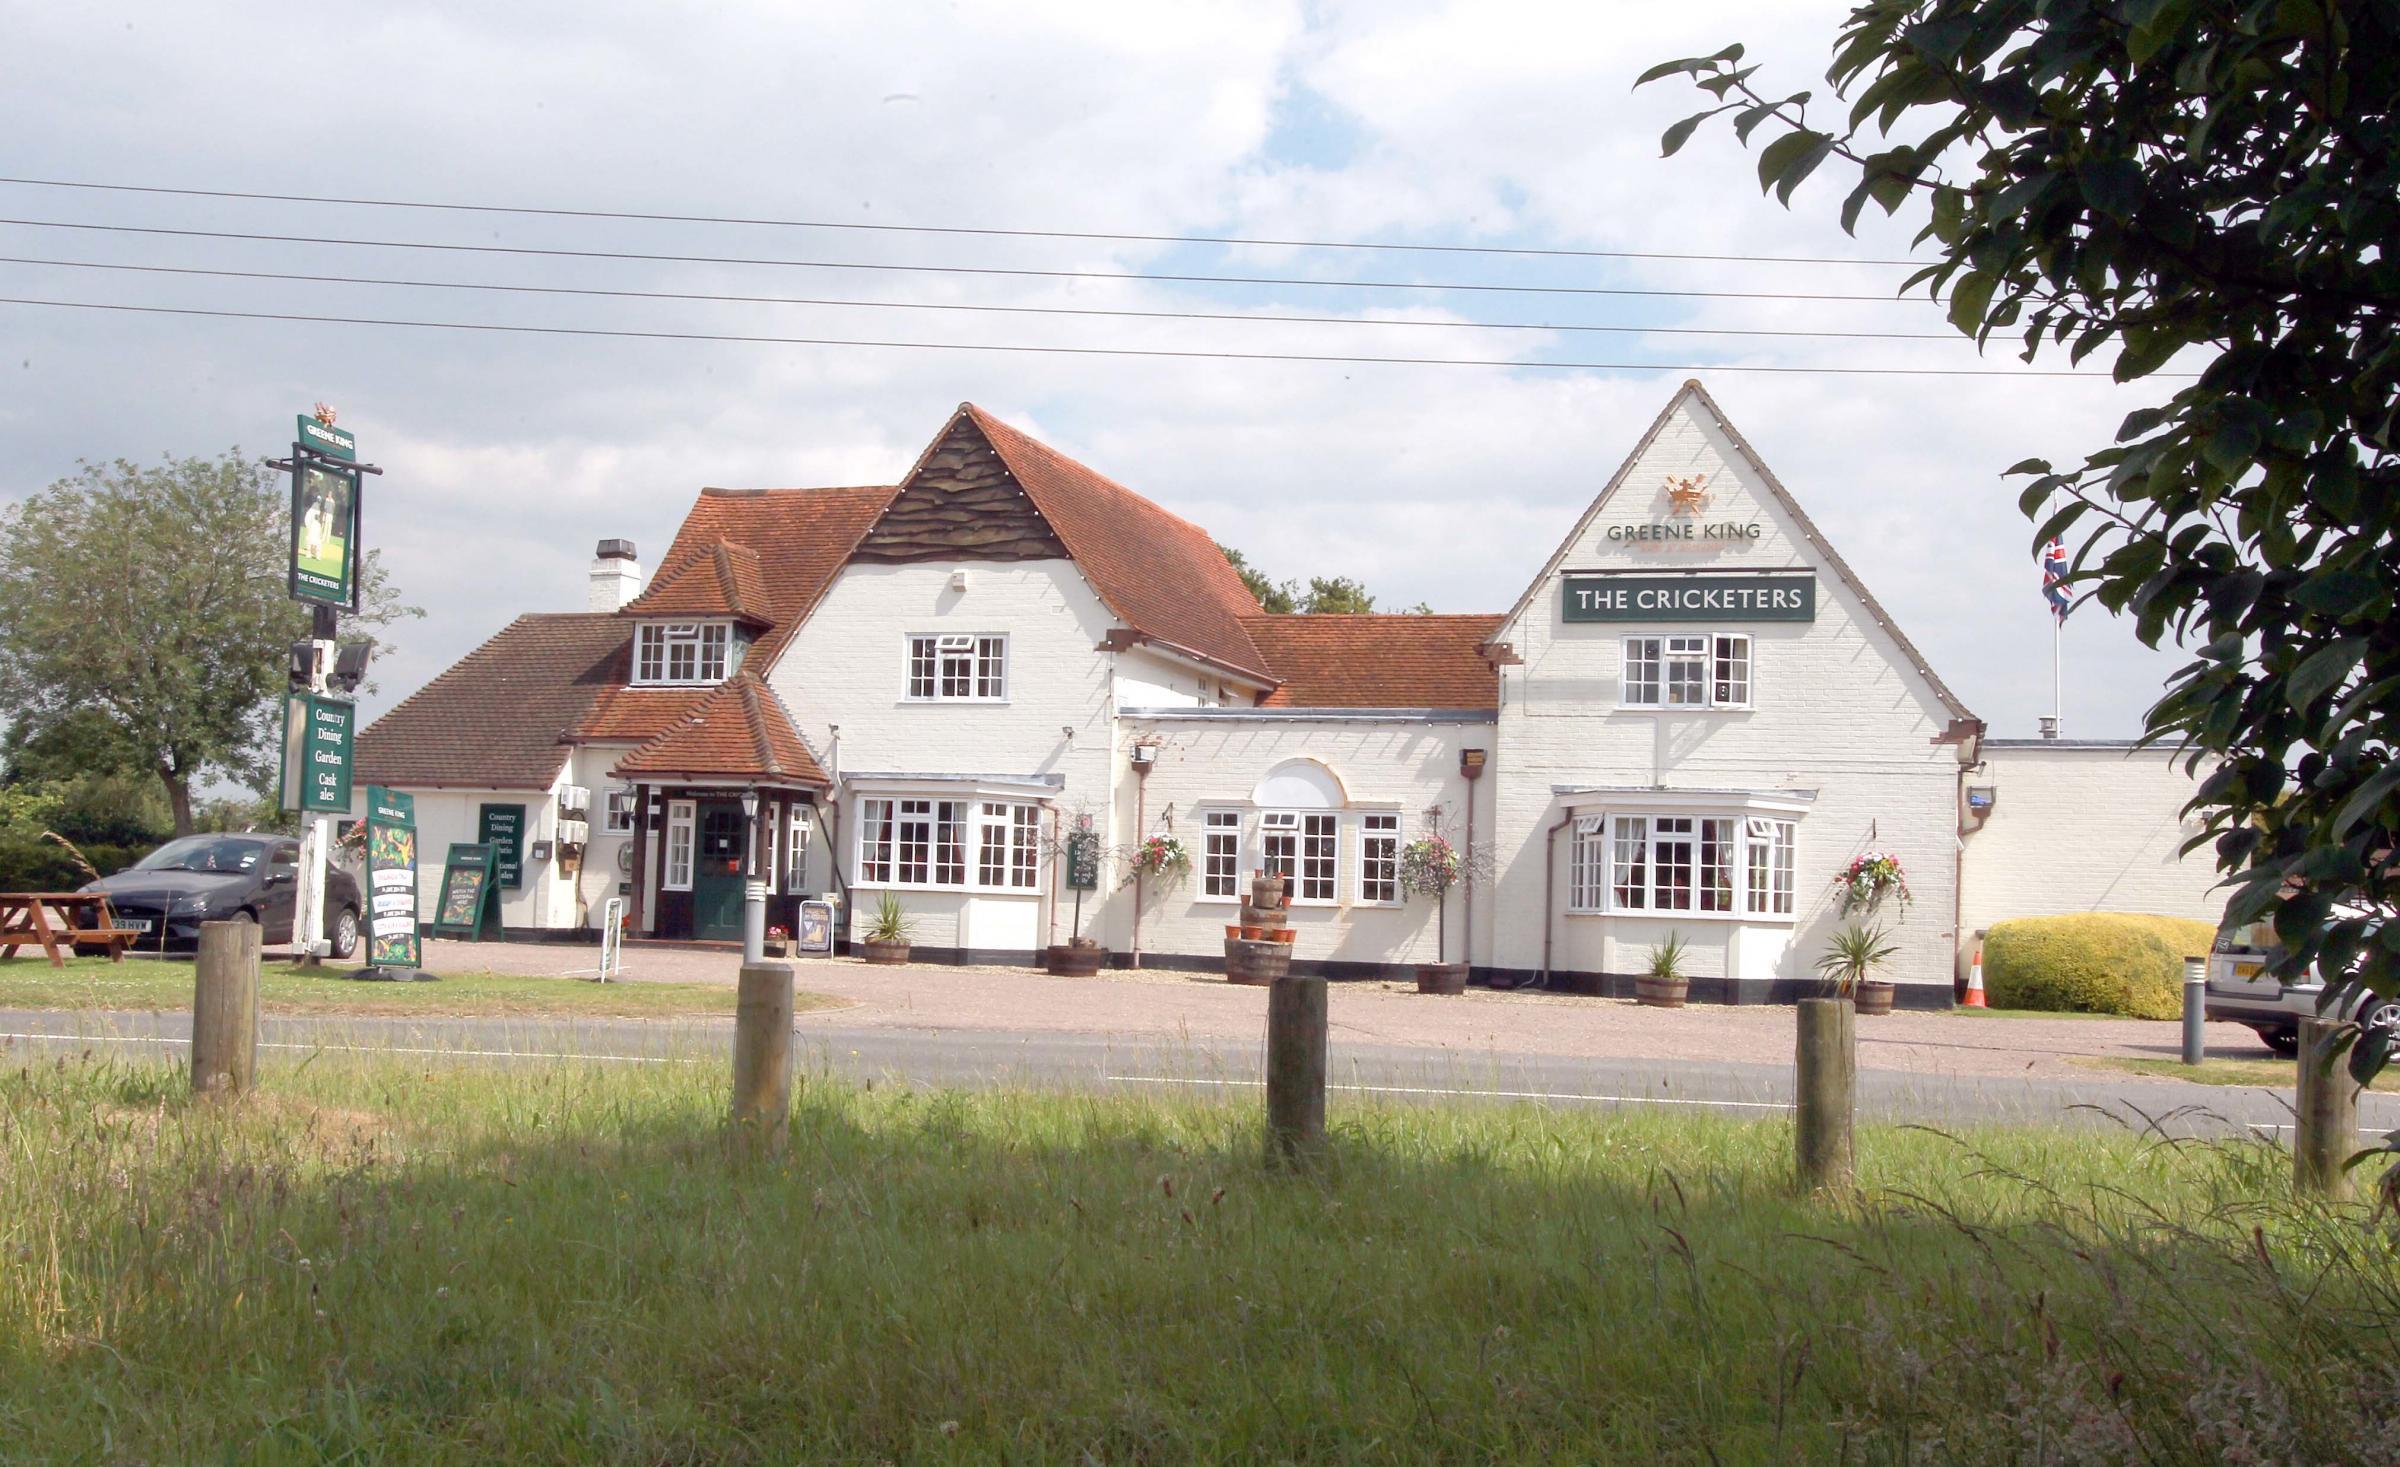 The Cricketers in Eight Ash Green 